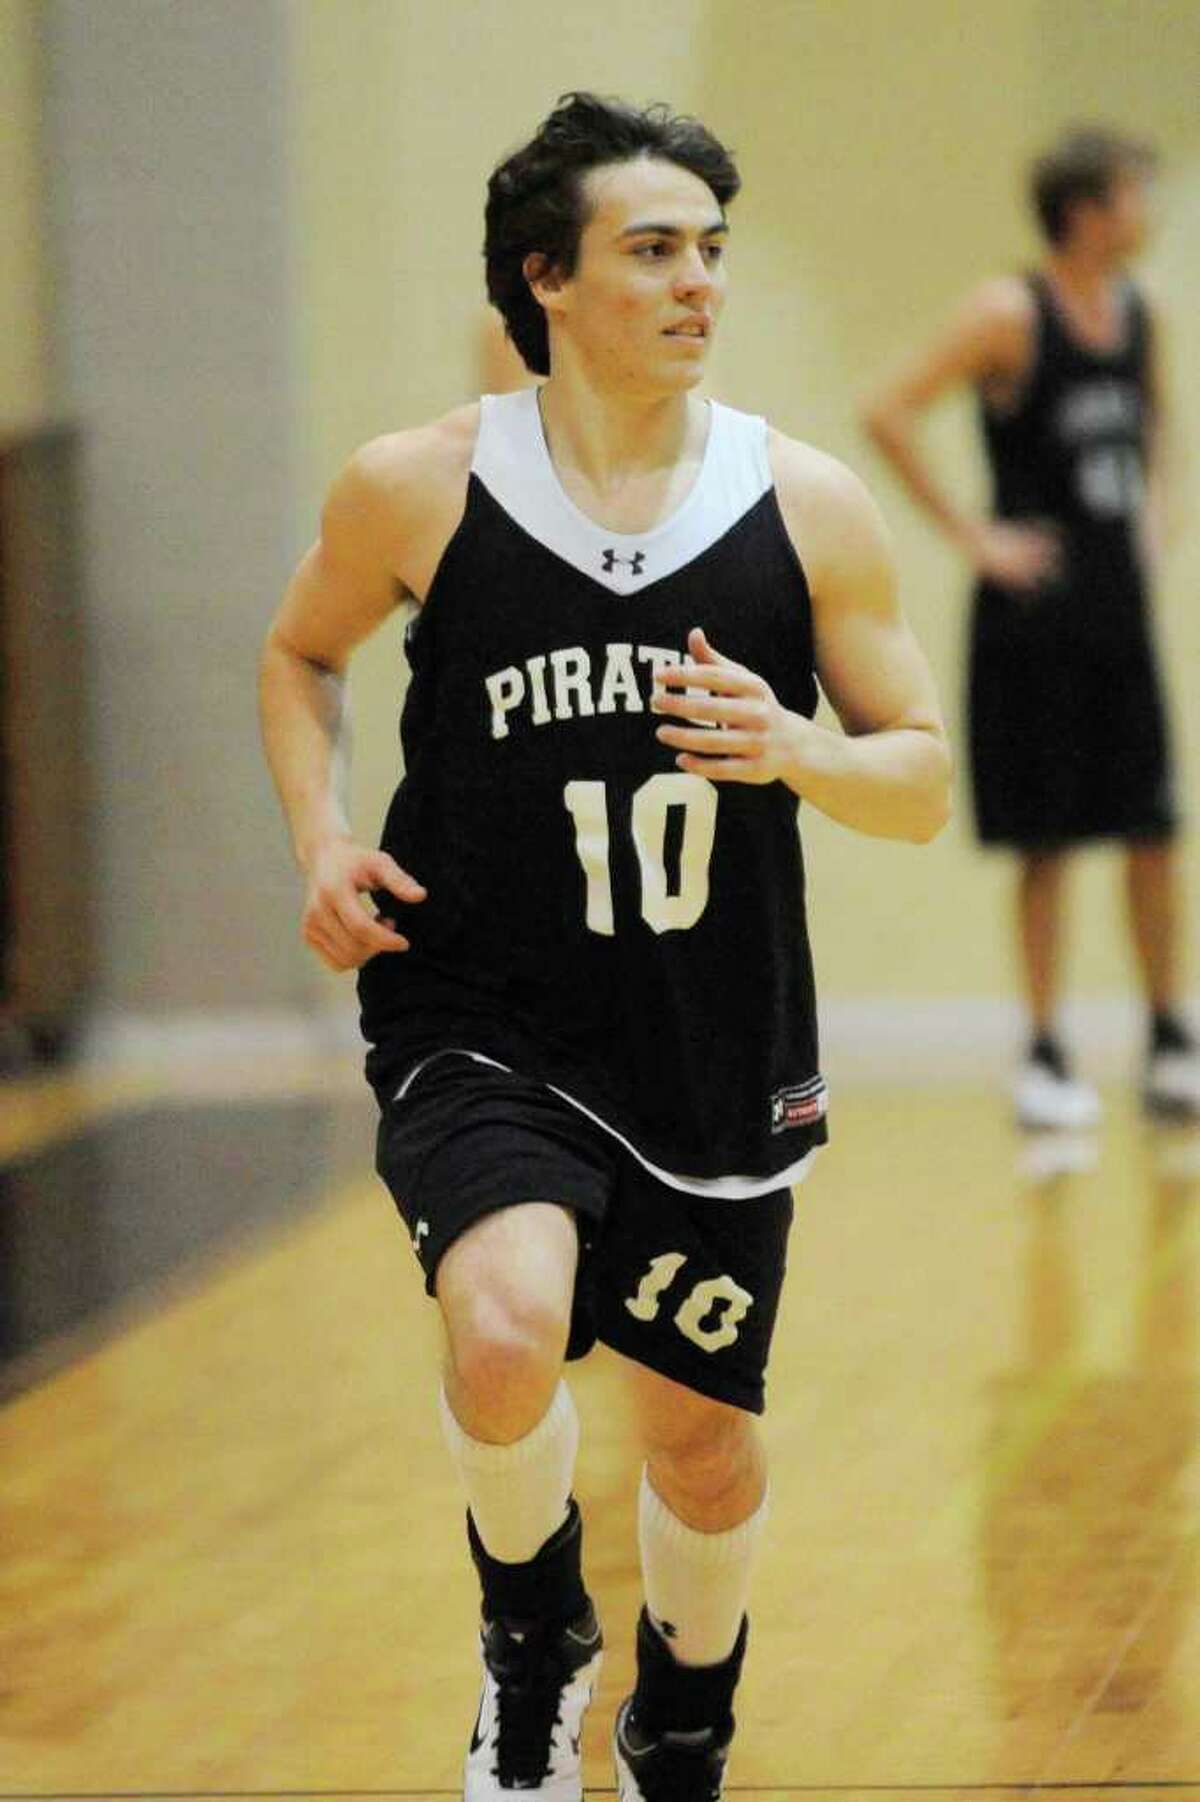 Vidor boys basketball player Elon Mancebo works on team drills with the Pirates during practice on Wednesday. Mancebo, a foreign exchange student from Brazil, leads the team in scoring. Vidor will host Ozen for a District 20-4A game on Friday. Wednesday, January 5, 2010 Valentino Mauricio/The Enterprise